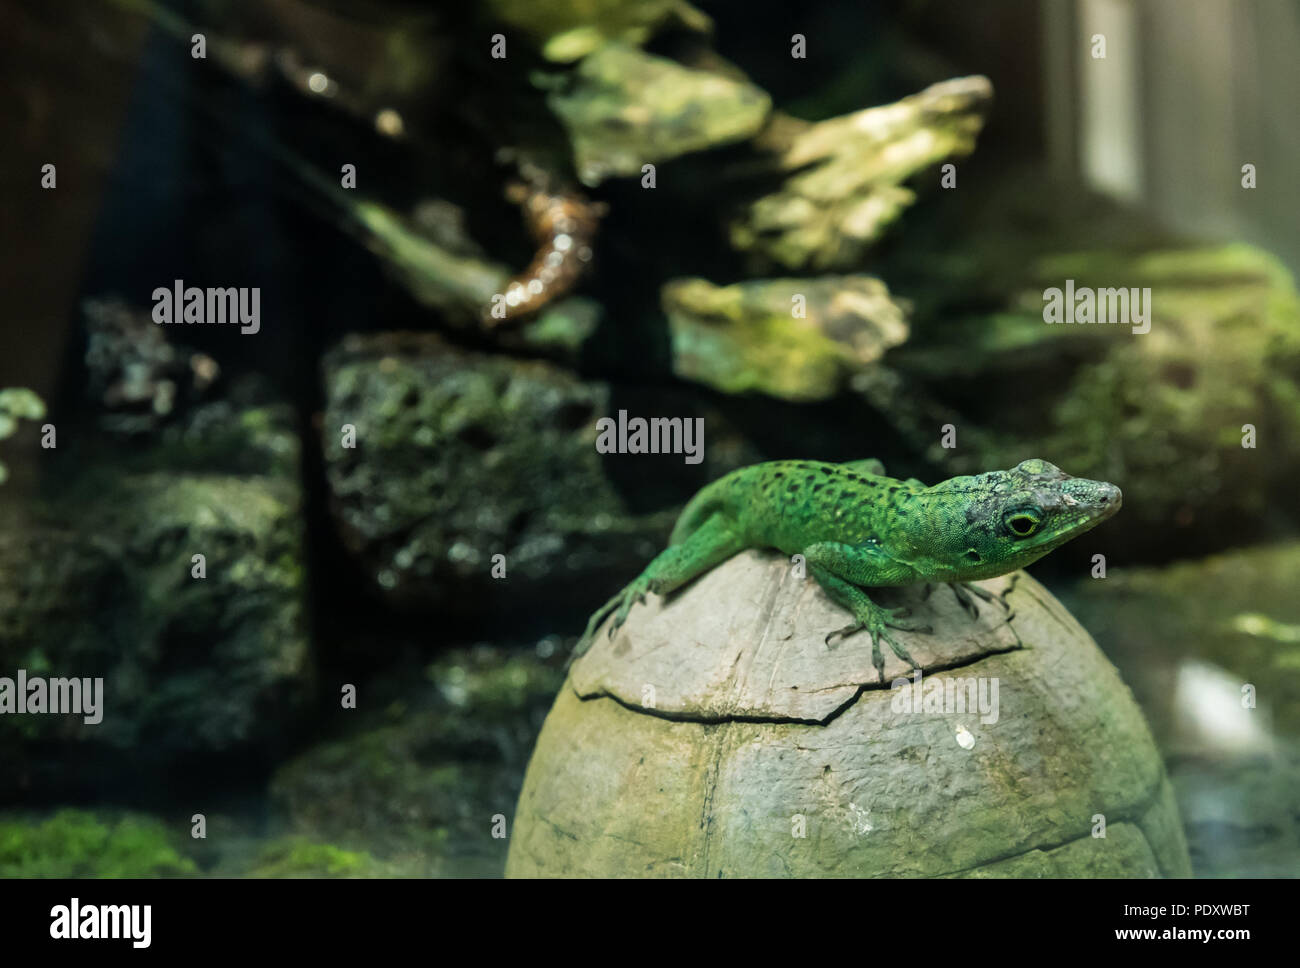 A vibrant green sand lizard posing on a cracked egg shell shaped rock, with a rock background, in a Zoo in Zurich. Stock Photo